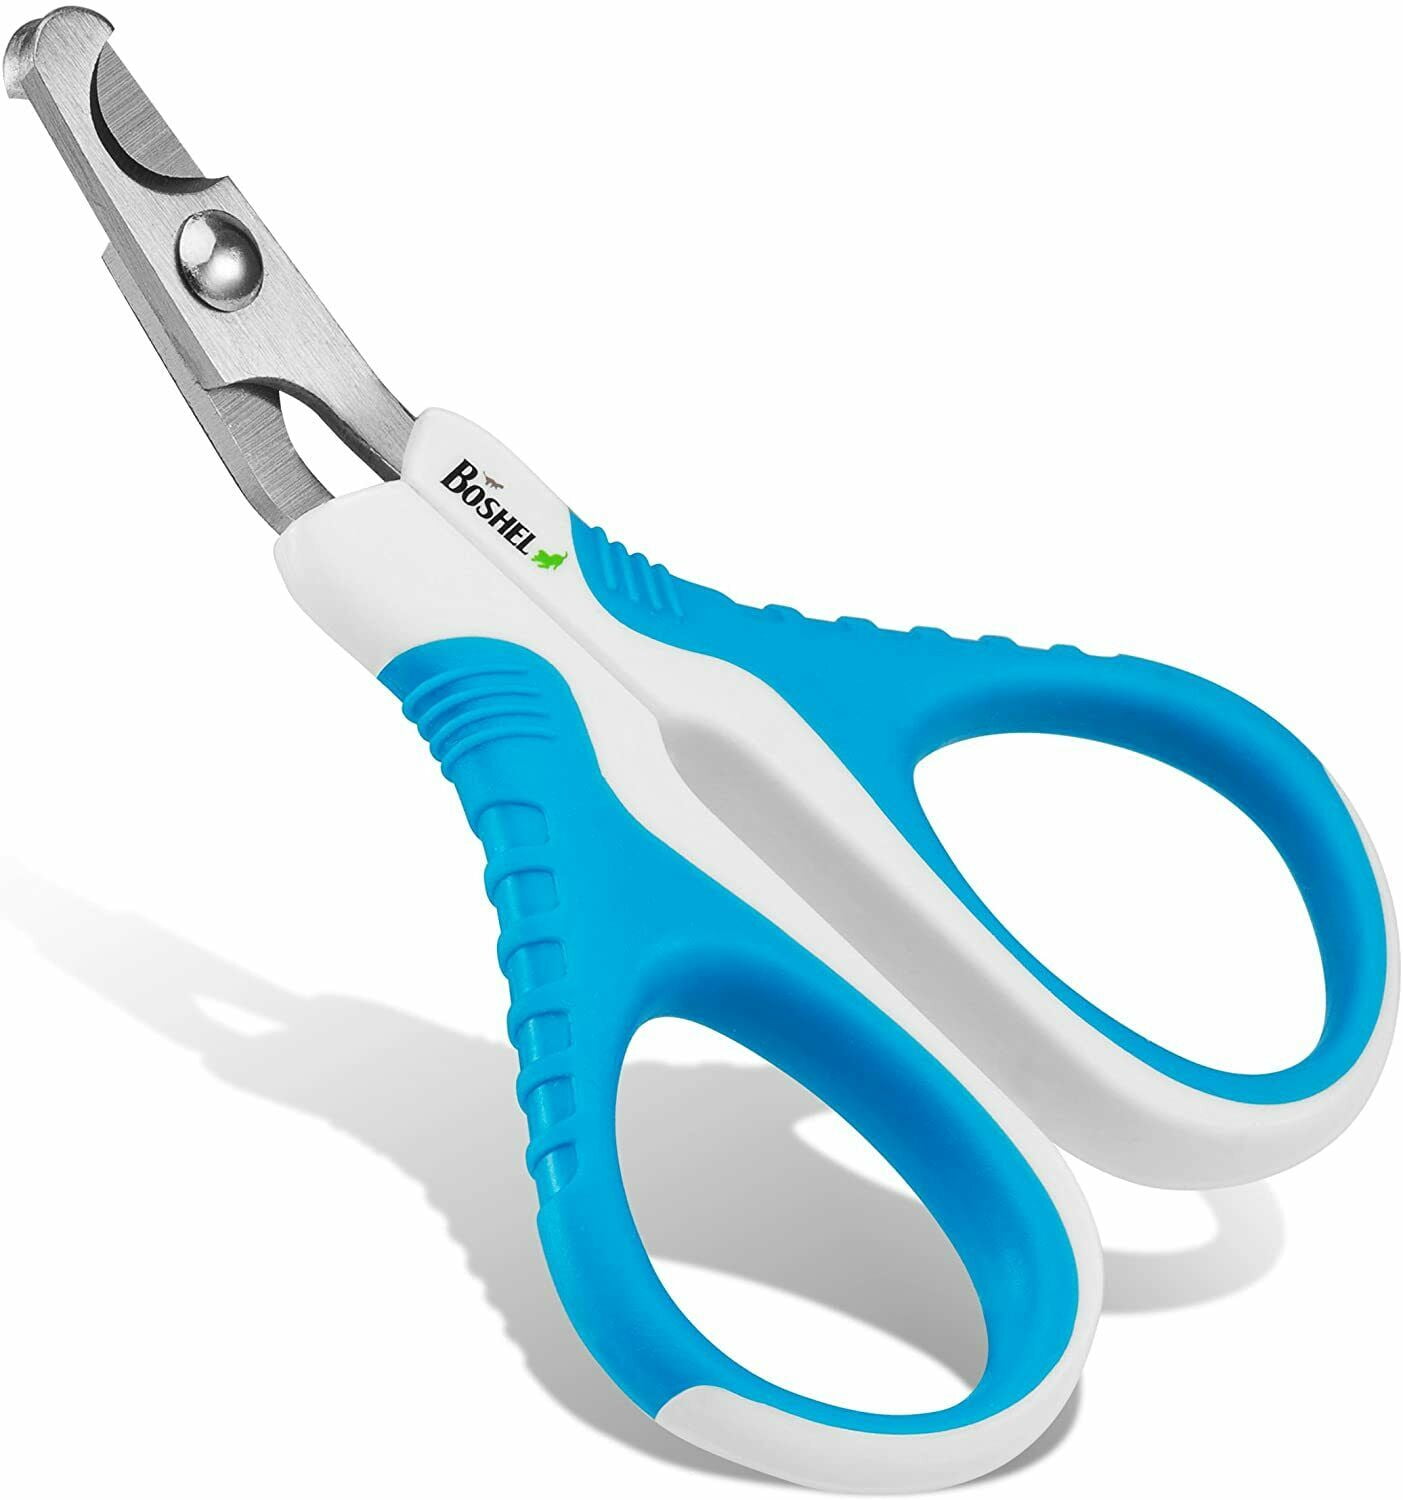 Professional Pet Nail Clippers and Trimmer - Best for Cats, Small Dogs and  Any Small Pets. Sharp Angled Blade Pet Nail Trimmer Scissors | Catch.com.au